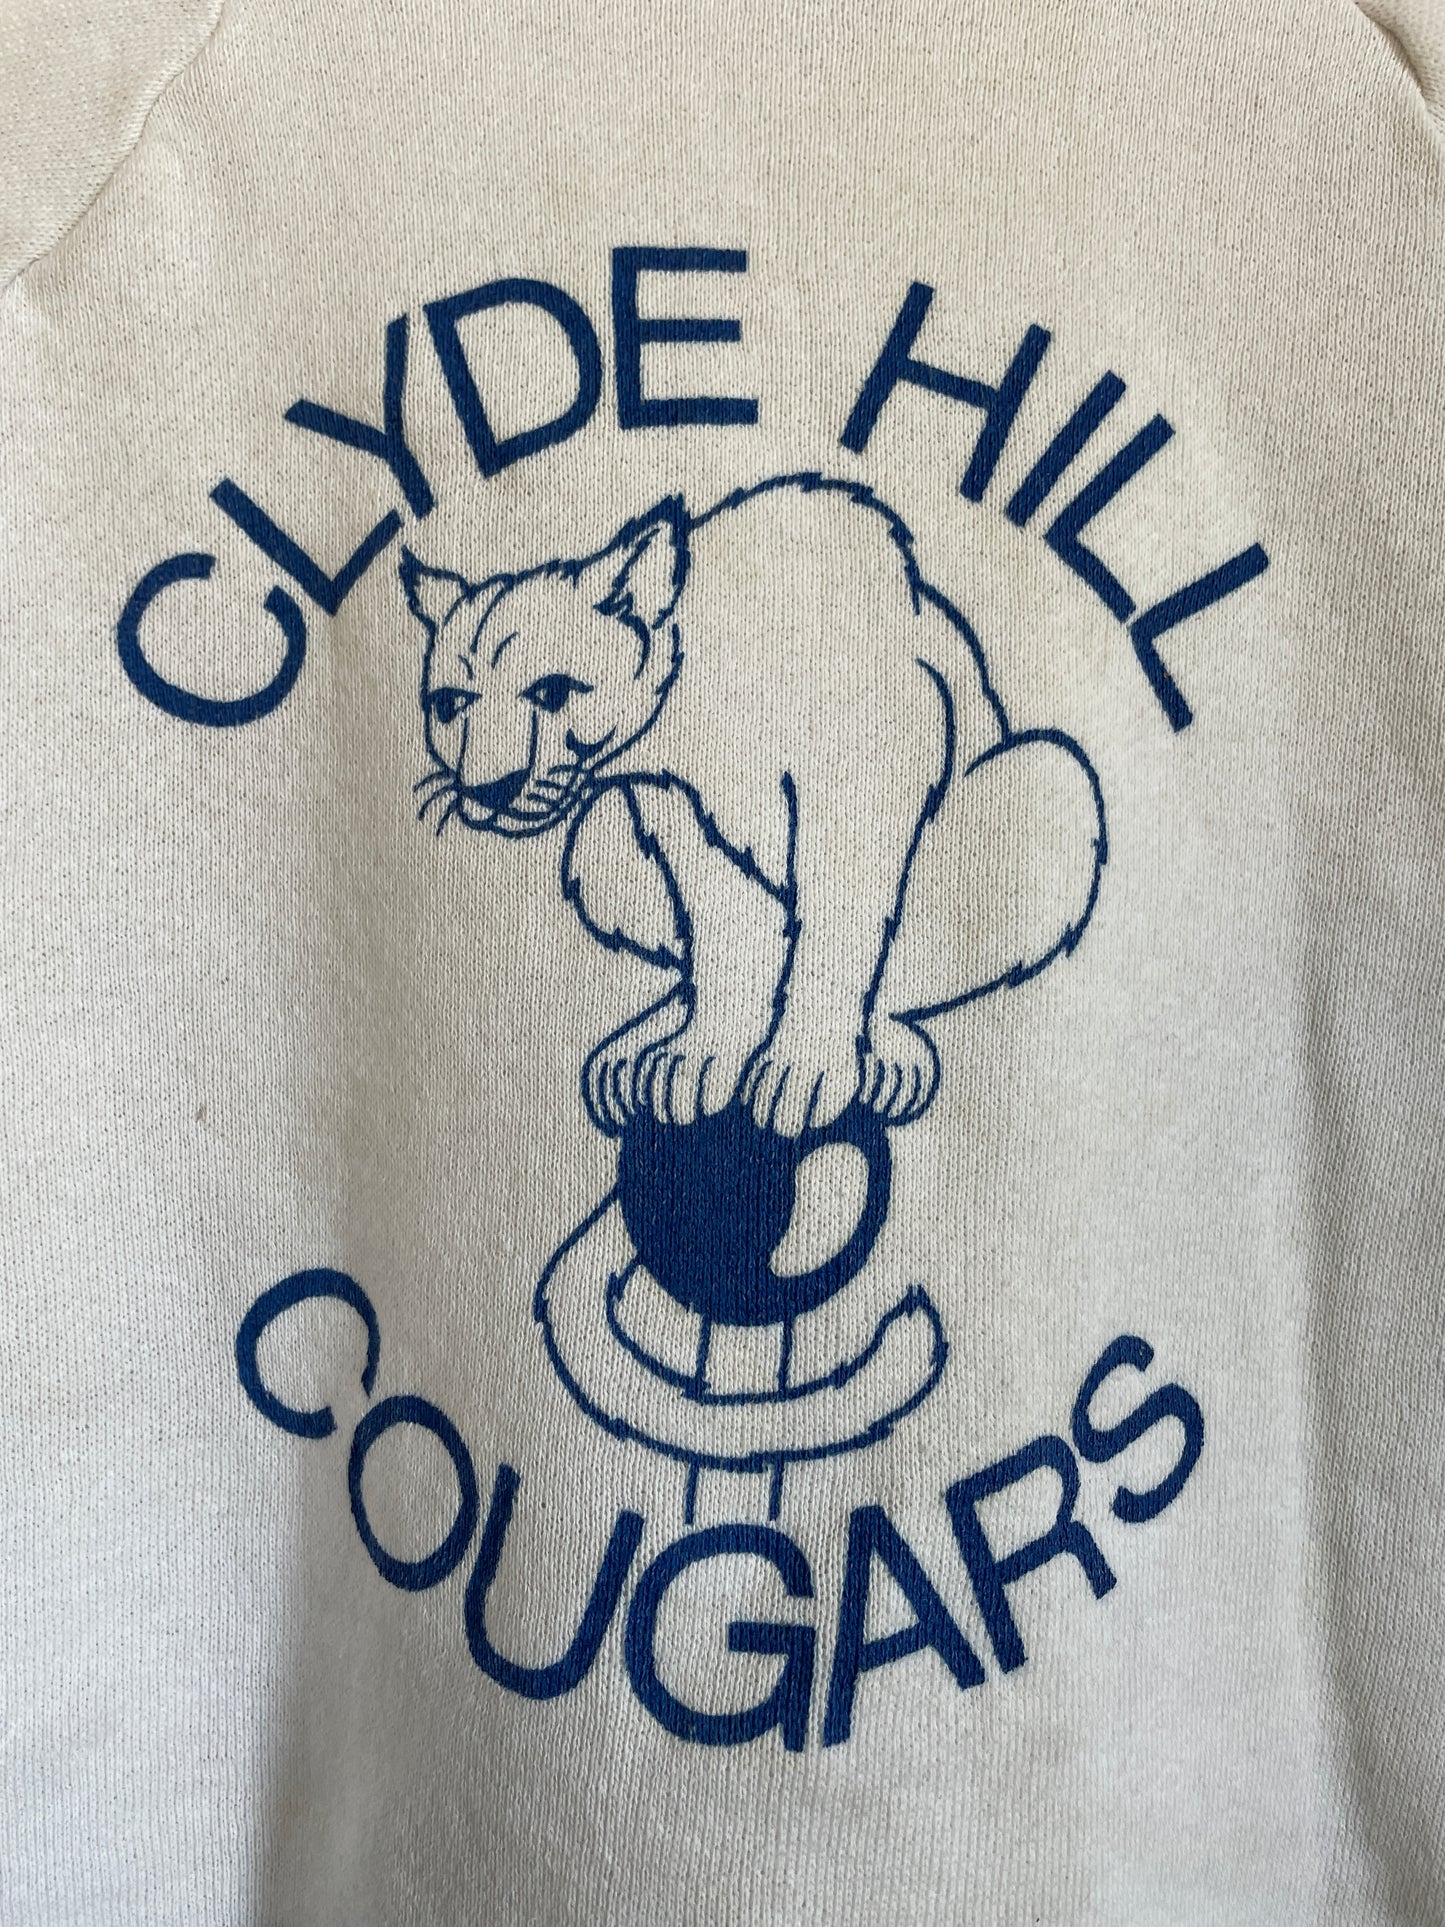 80s Clyde Hill Cougars Sweatshirt